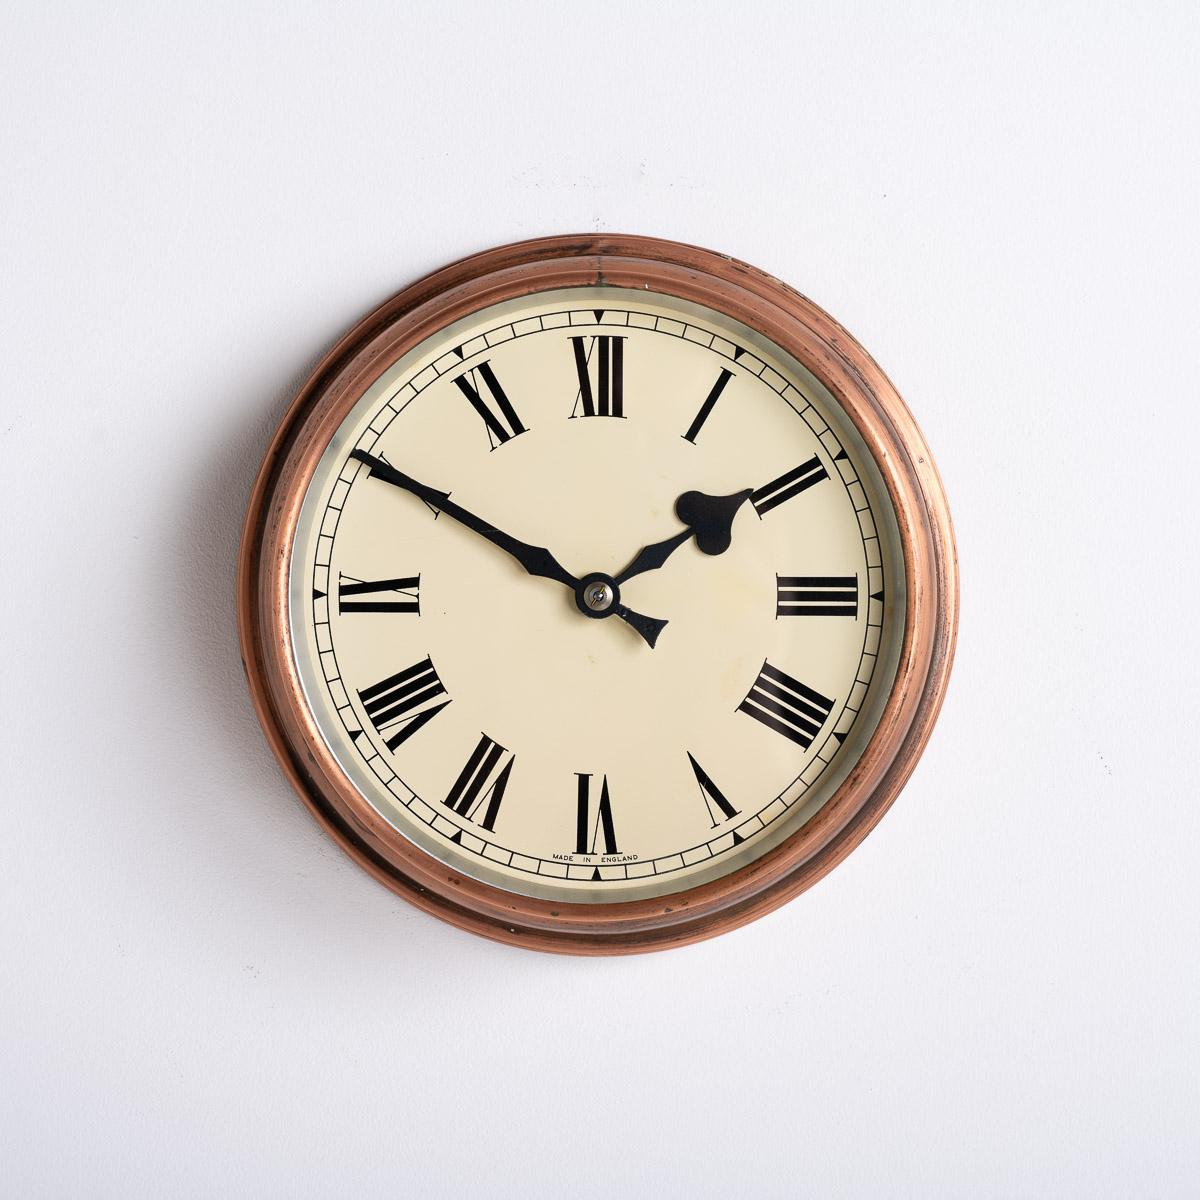 Reclaimed Industrial Aged Spun Copper Case Wall Clock By Synchronome 3